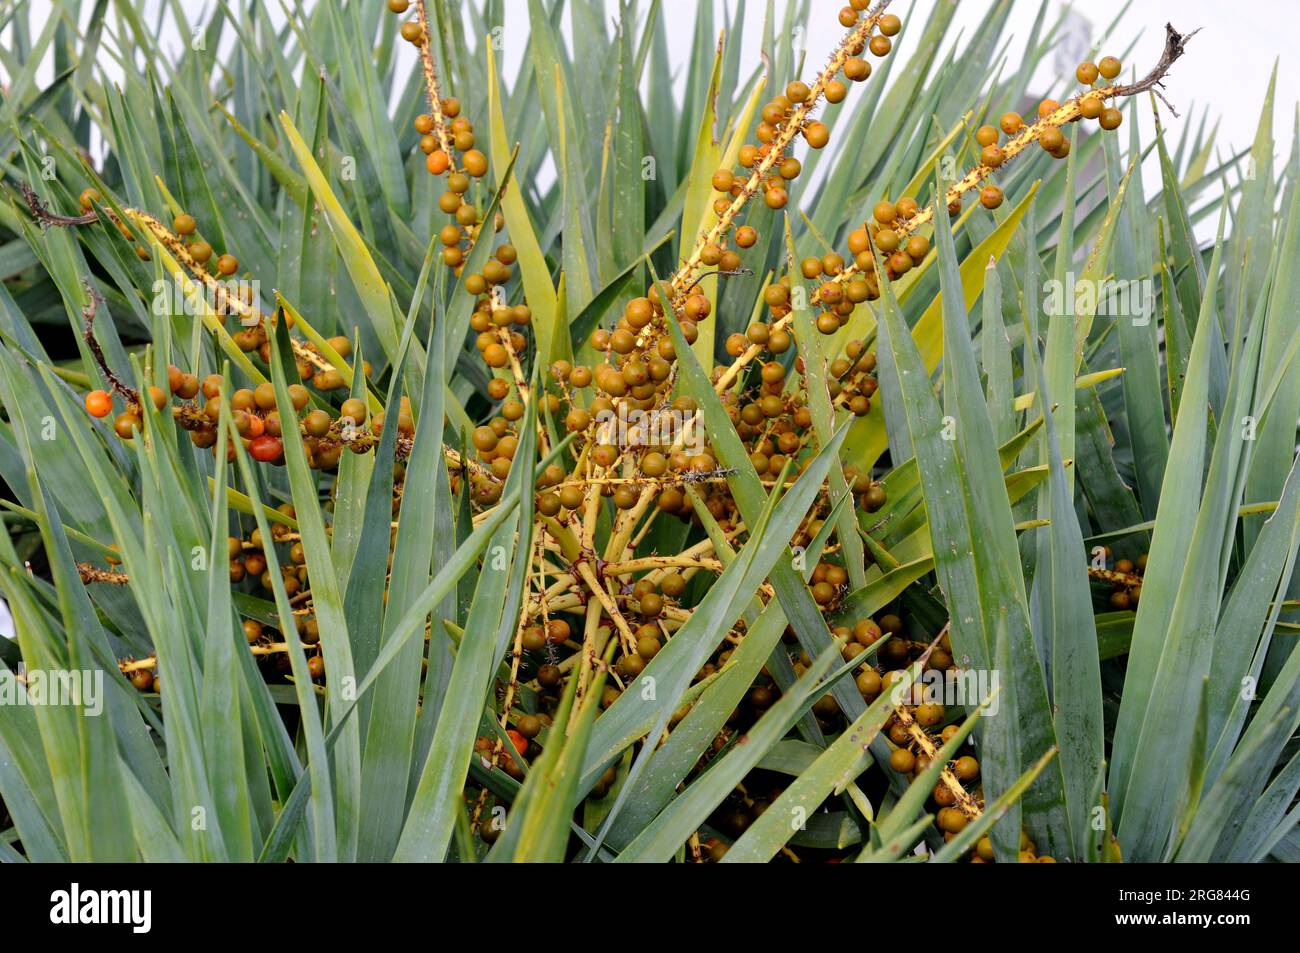 Drago or Canary Islands dragon tree (Dracaena draco) is a tree-like plant native of Macaronesia Region. Leaves and fruits (berries) detail. Stock Photo